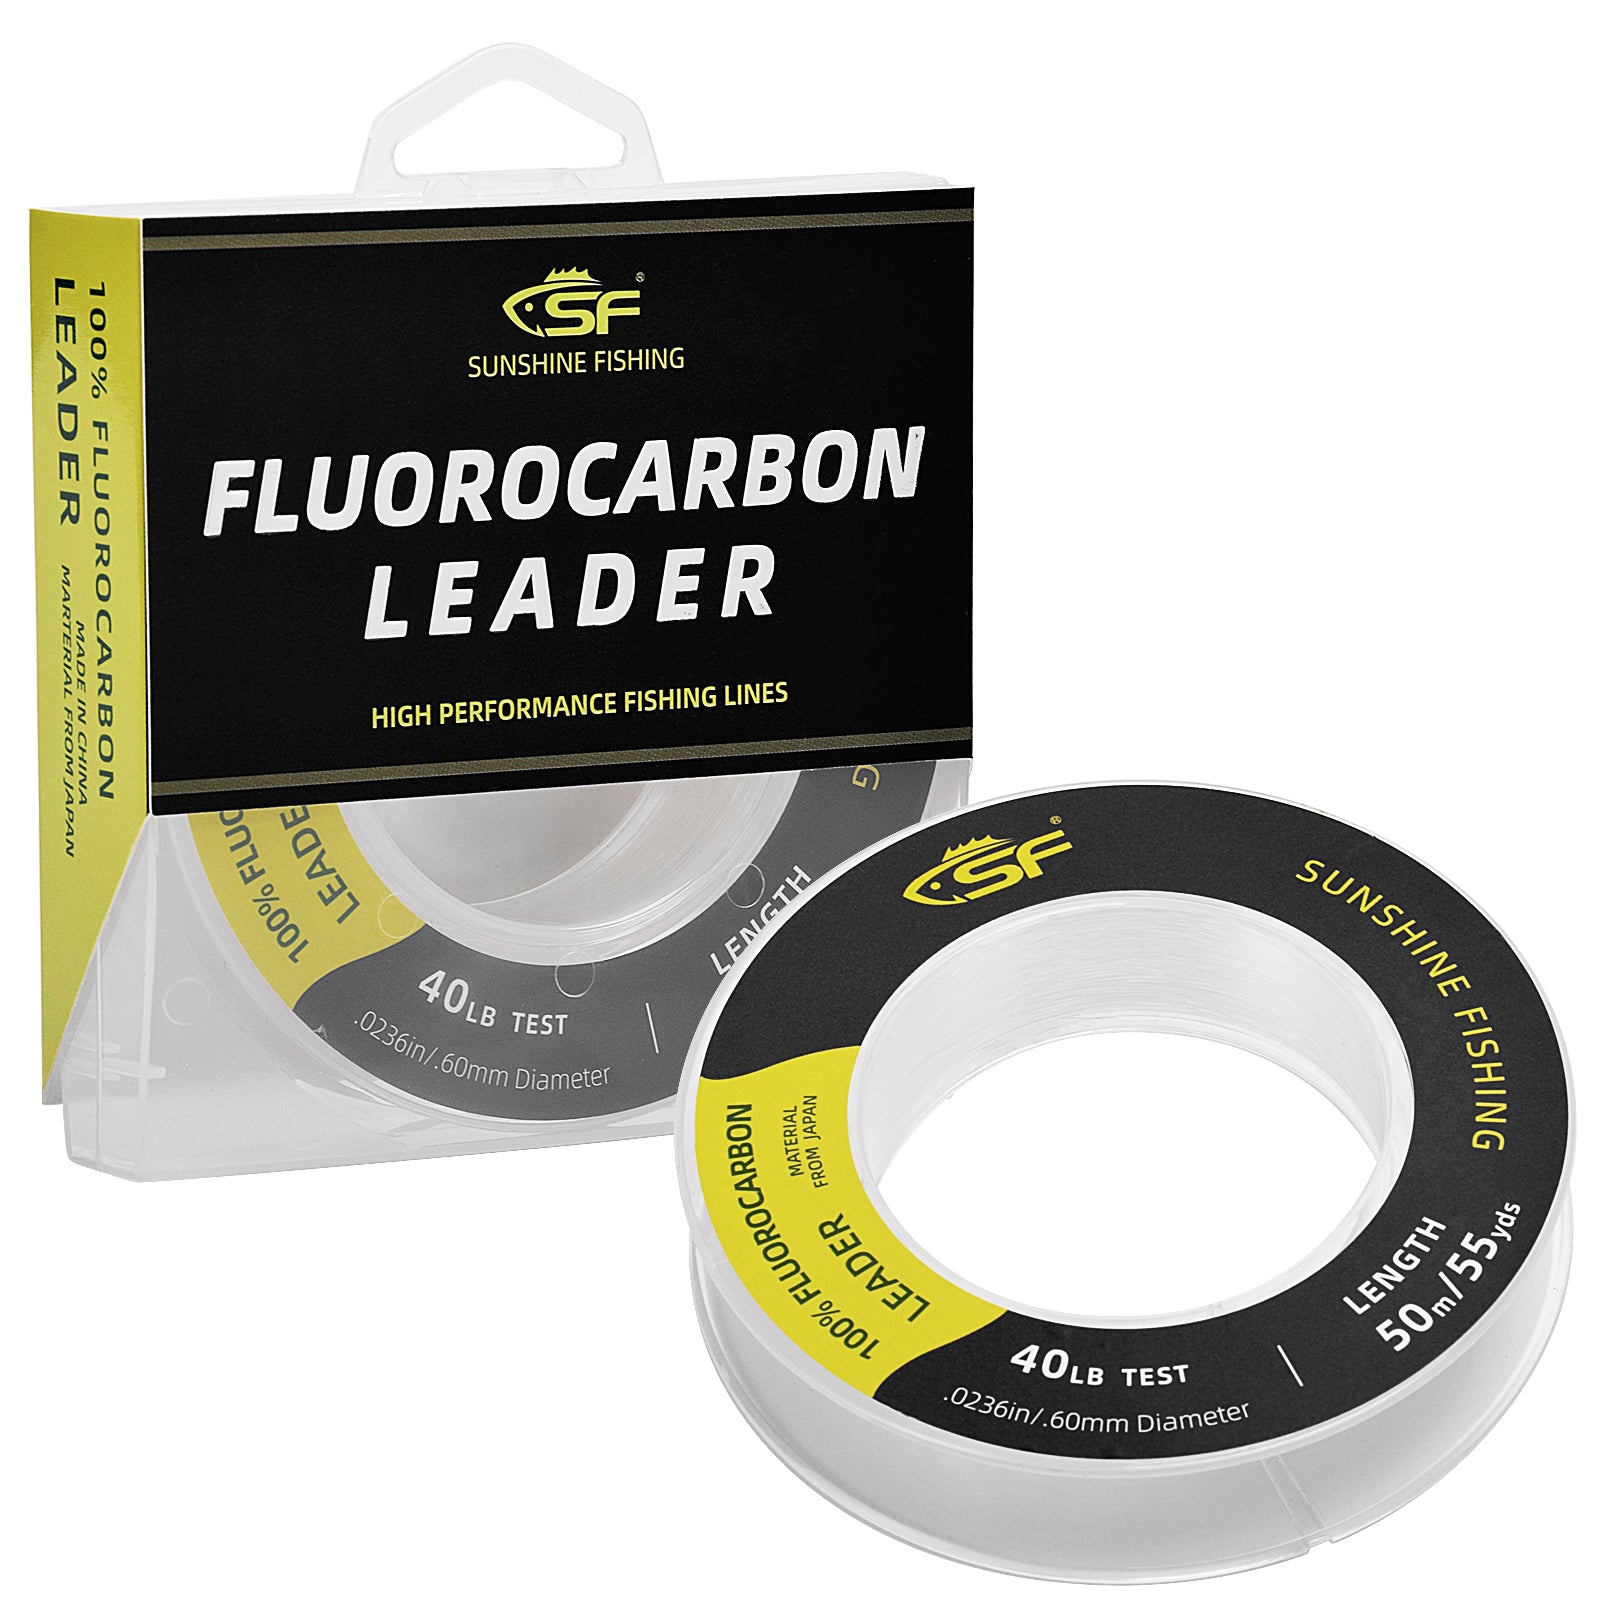 SF 100% Pure Fluorocarbon Leader – Sunshine Fishing Store